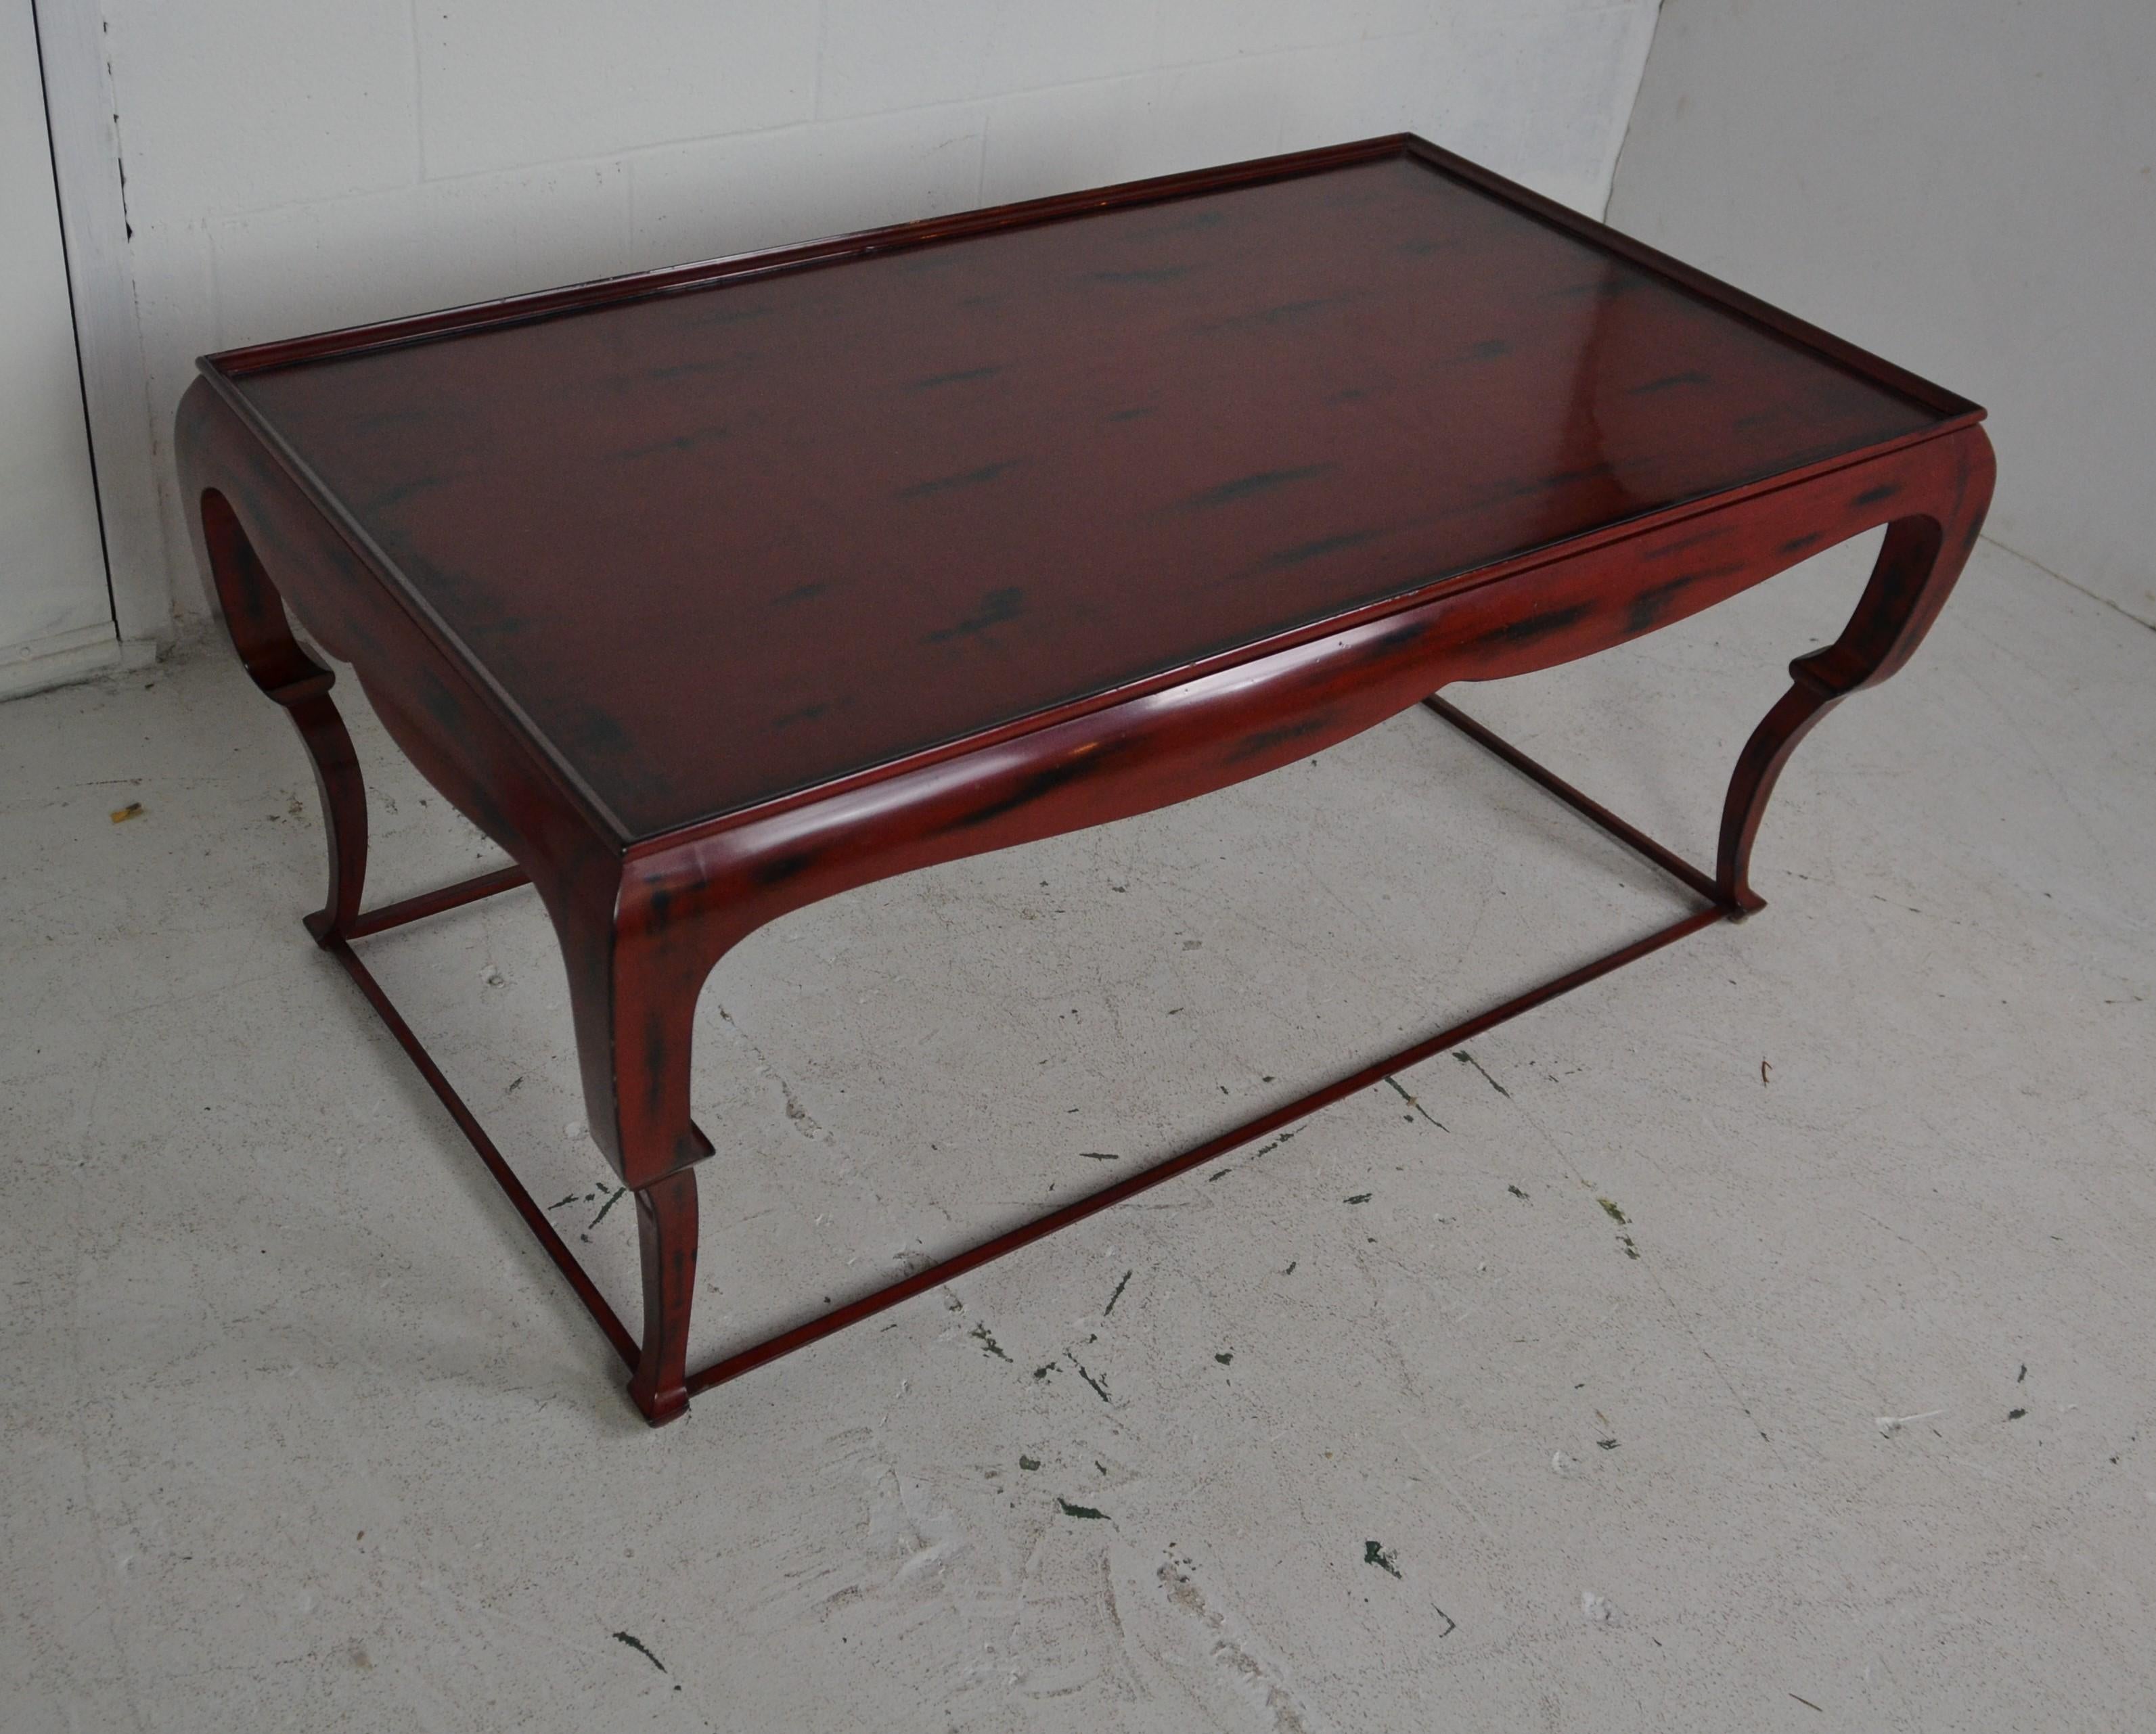 A Chinese red lacquer coffee table with smokey black decorations. A cabriole style leg with pad feet and a floor level stretcher bar.